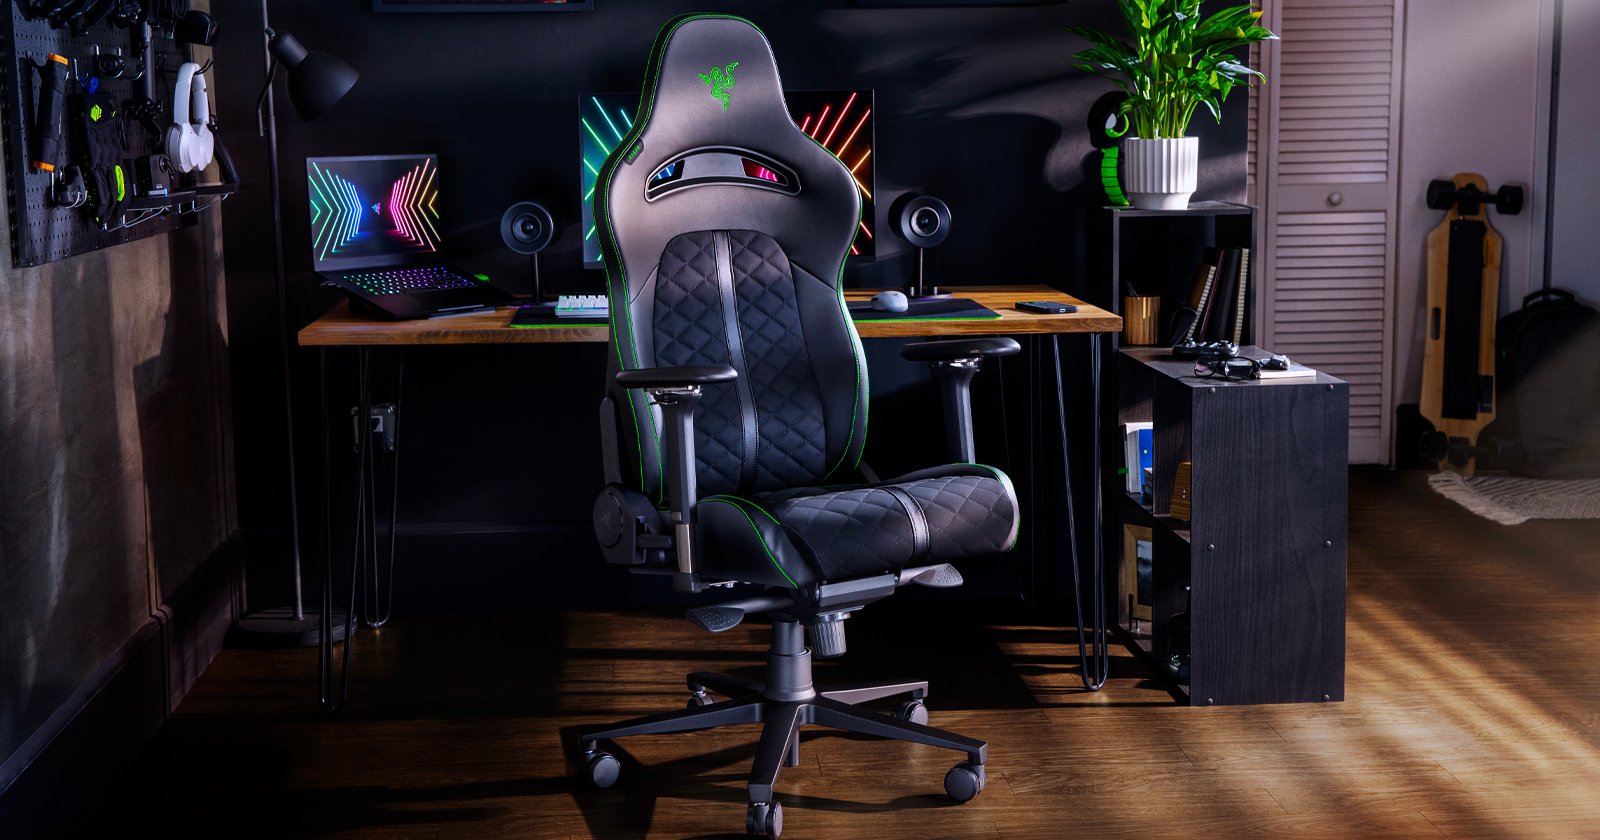 Razer Launched an Office Chair and It's Supposedly Pretty Great | PetaPixel